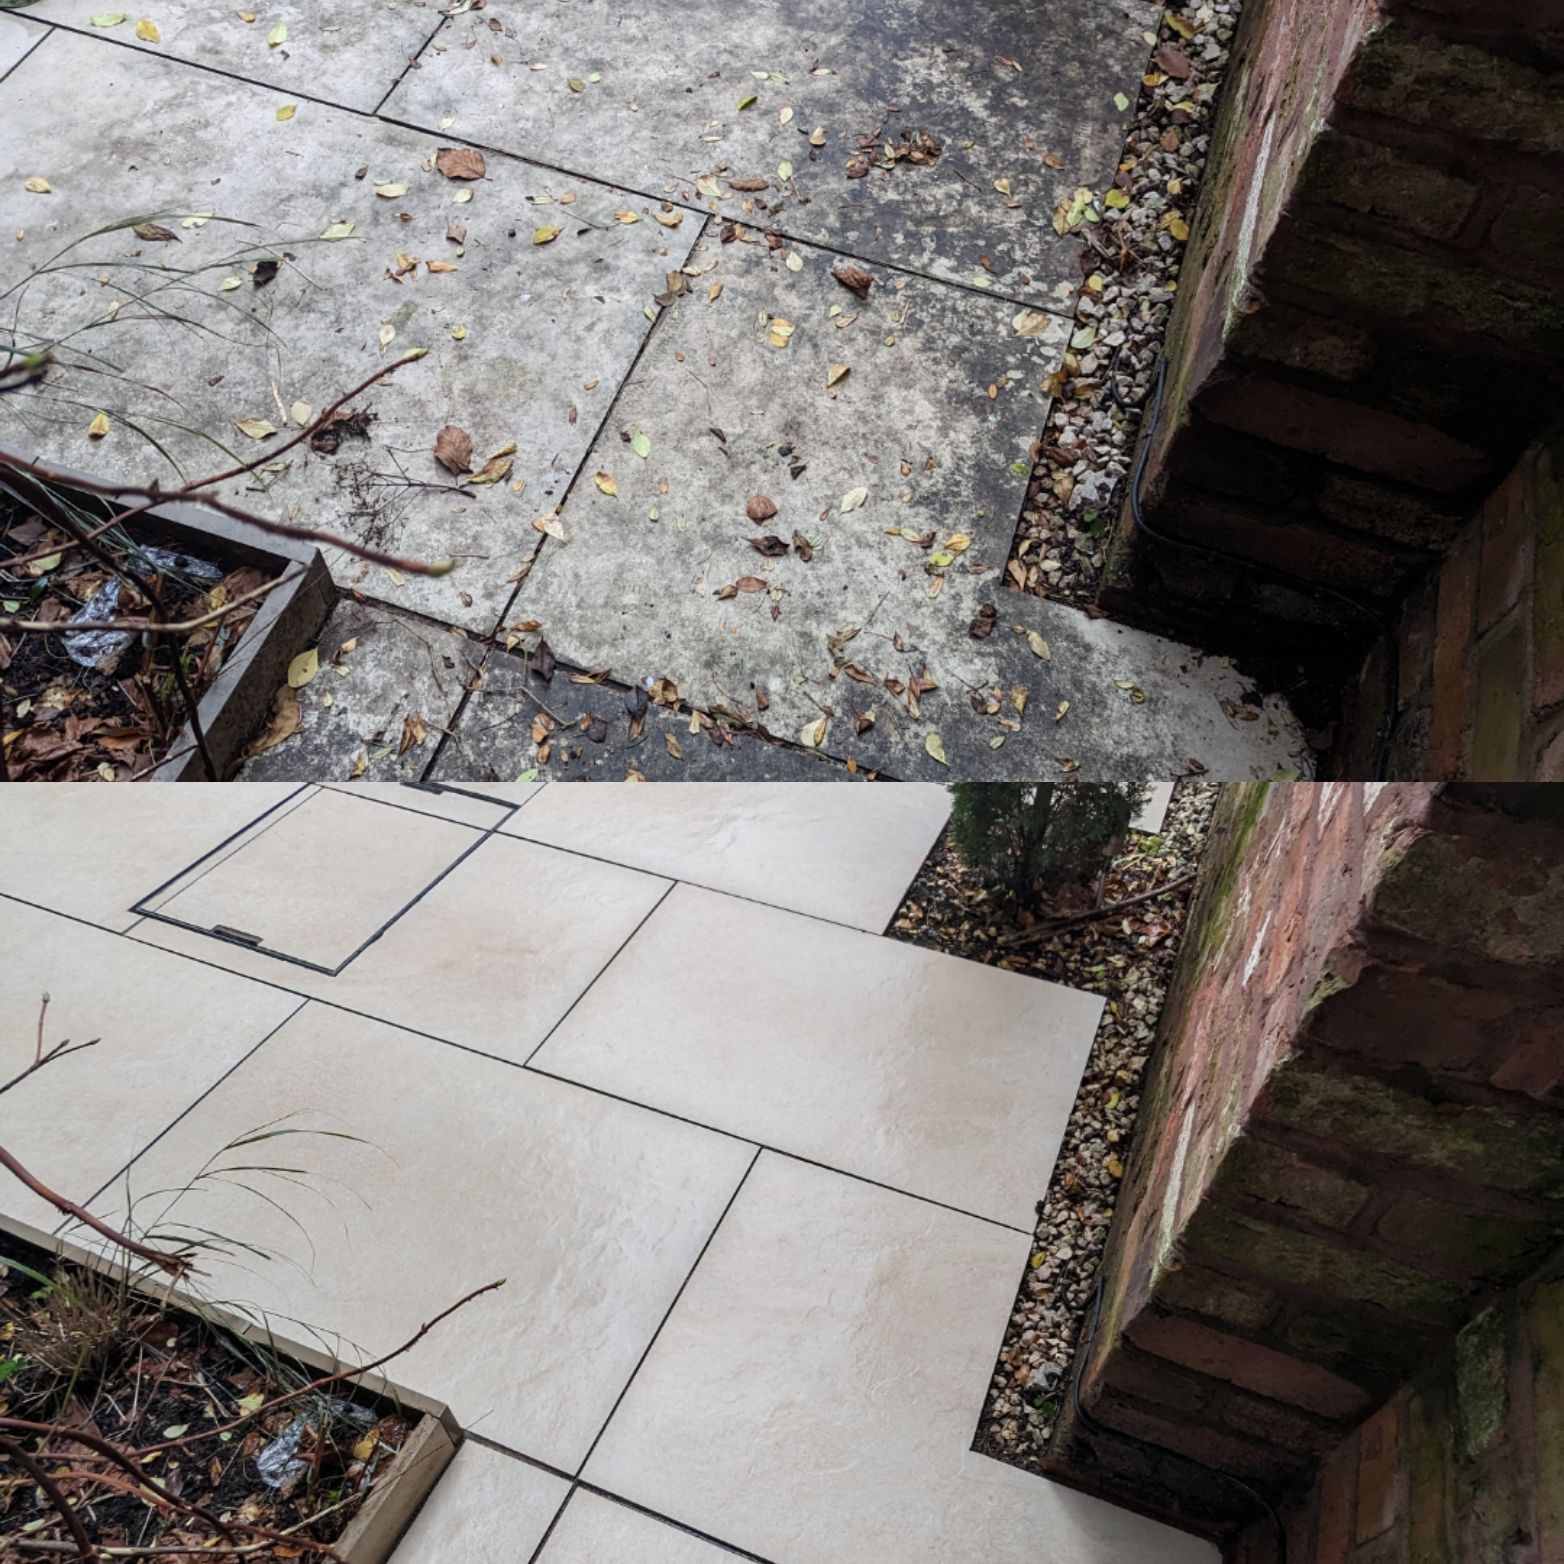 PATIO PORCELAIN TILES AND GROUT DEEP CLEANING AND SEALING IN STOCKPORT, GREATER MANCHESTER